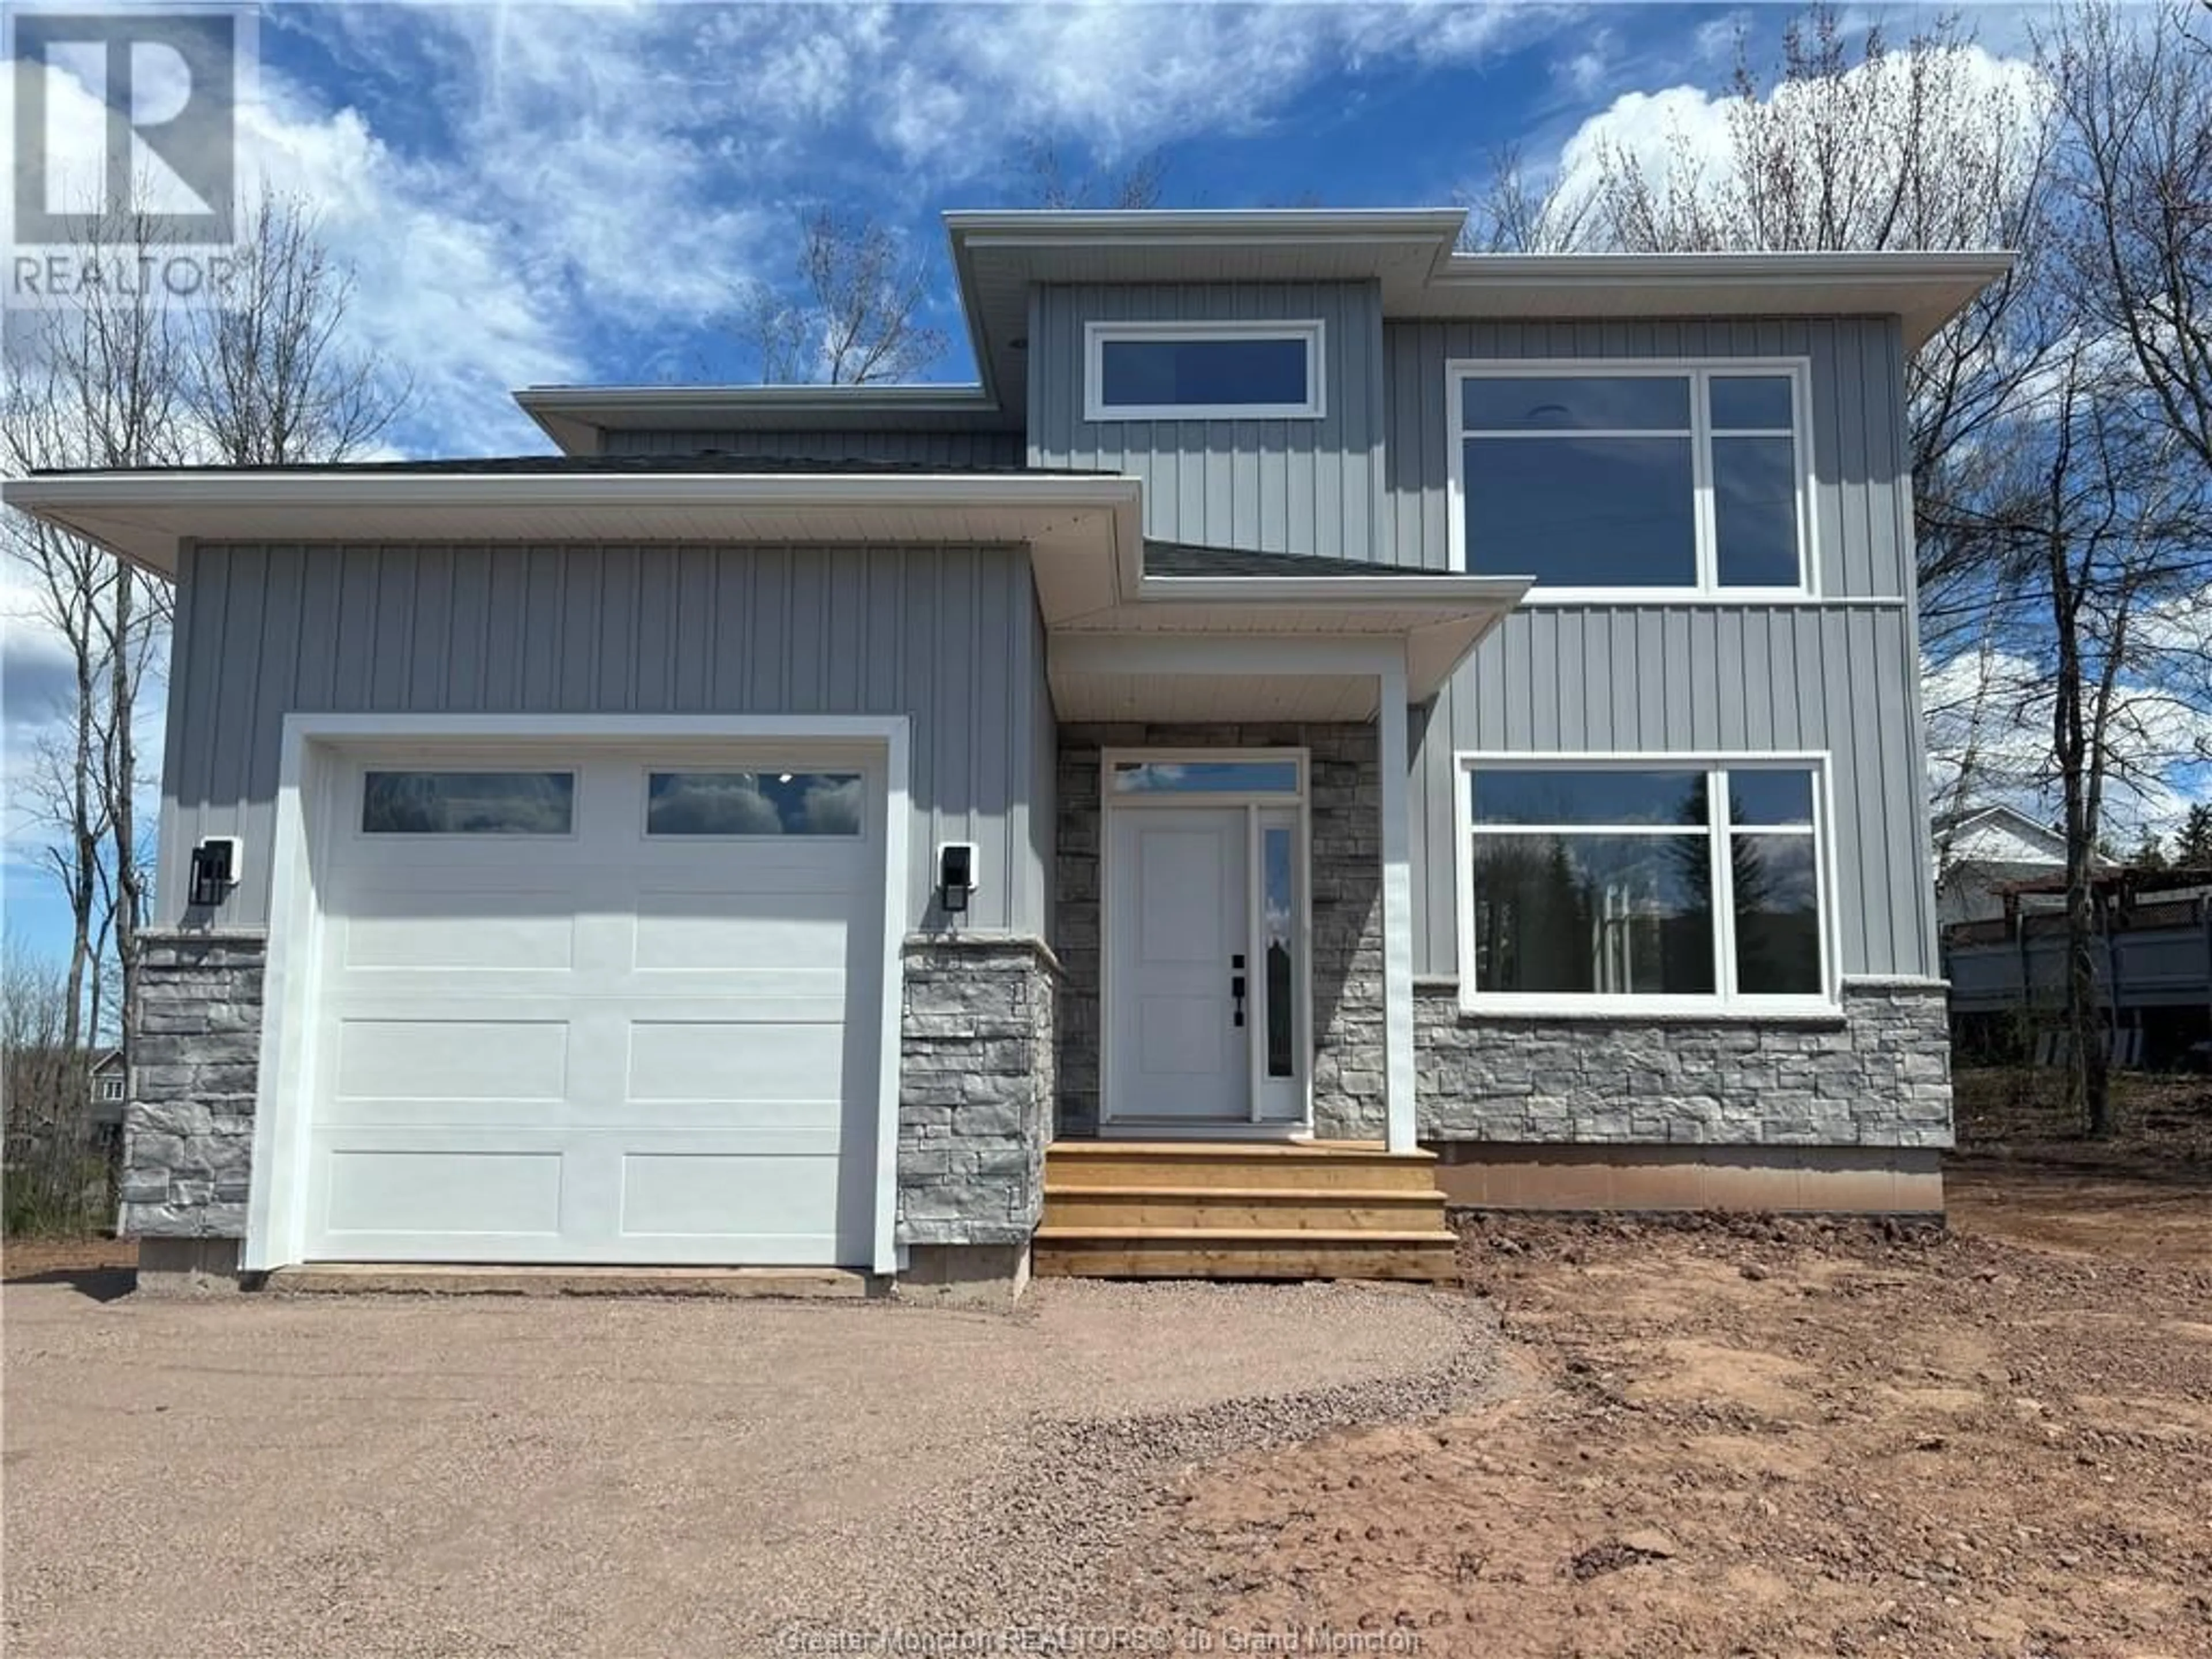 Home with vinyl exterior material for 145 Ripplewood RD, Moncton New Brunswick E1A2A7